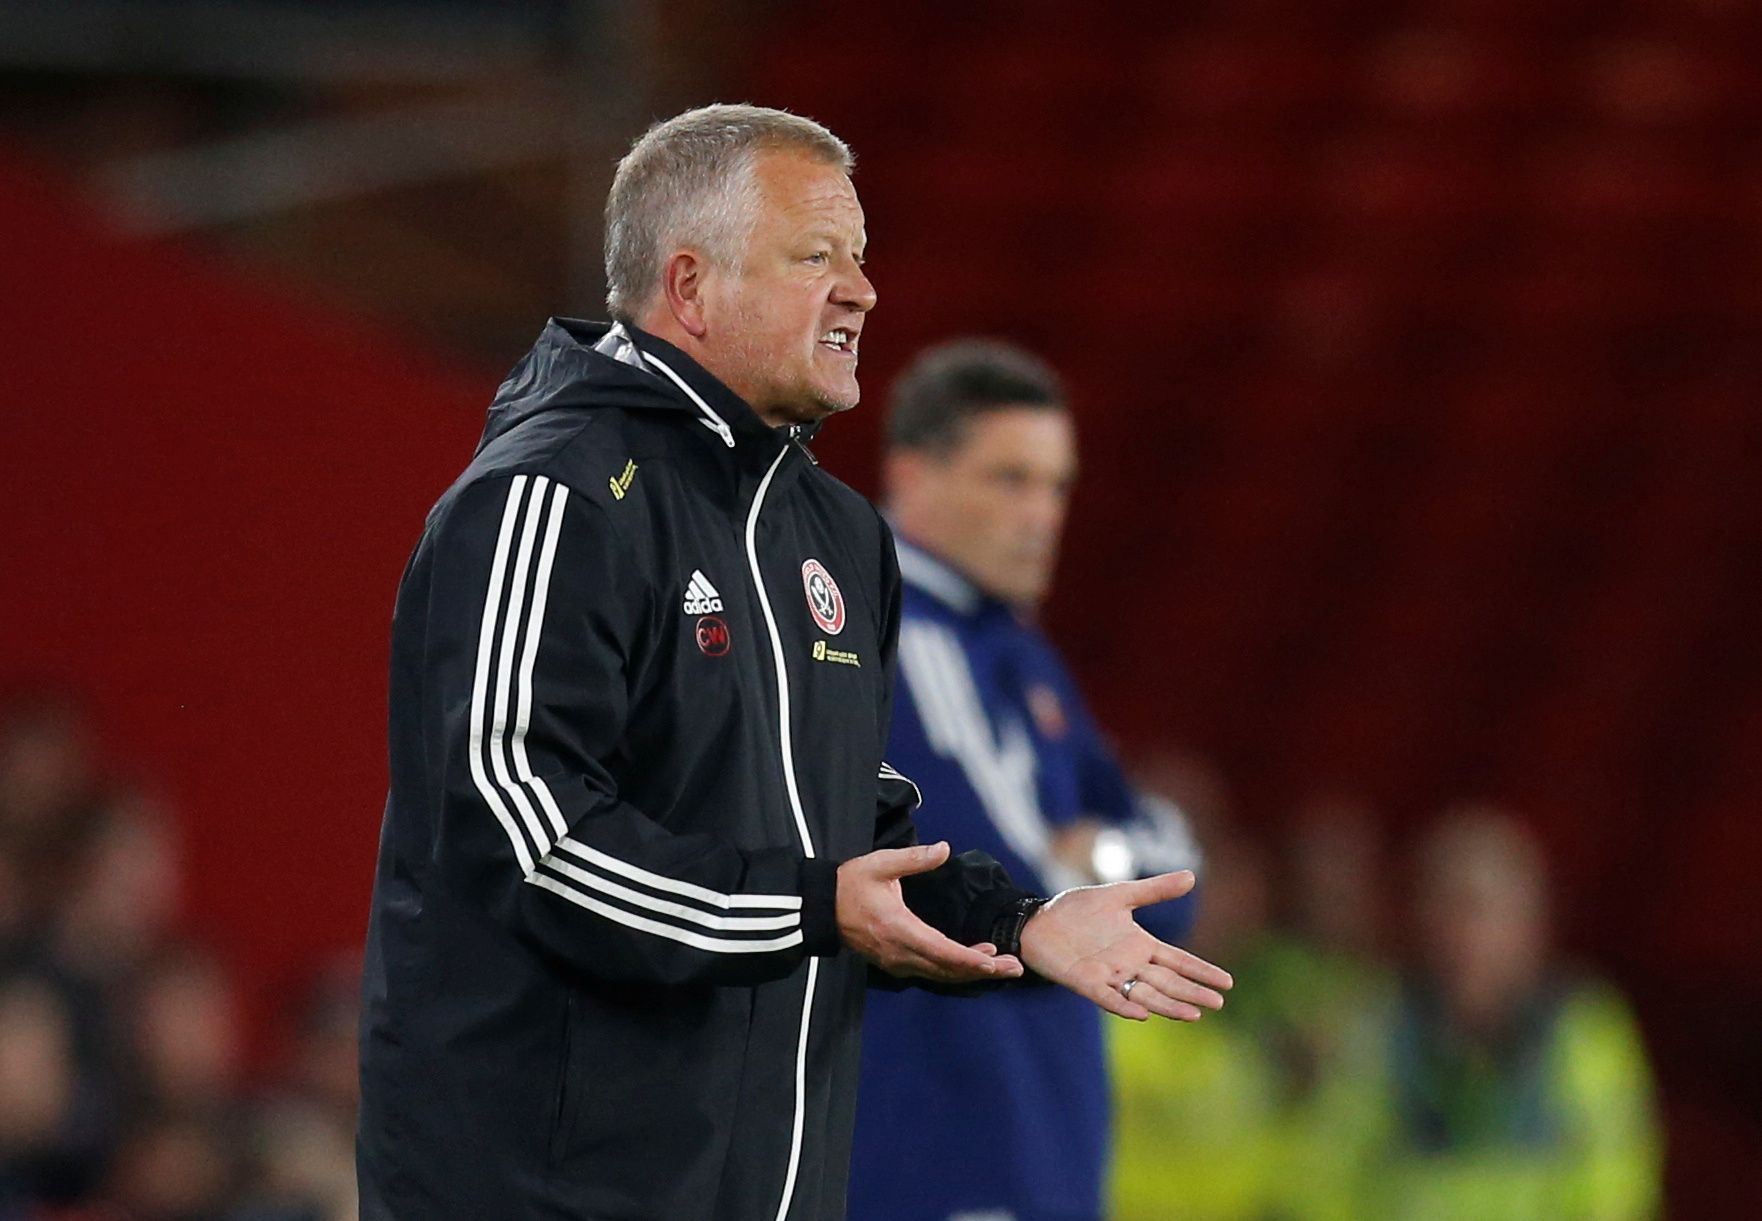 Soccer Football - Carabao Cup - Third Round - Sheffield United v Sunderland - Bramall Lane, Sheffield, Britain - September 25, 2019  Sheffield United manager Chris Wilder reacts    Action Images via Reuters/Ed Sykes  EDITORIAL USE ONLY. No use with unauthorized audio, video, data, fixture lists, club/league logos or 